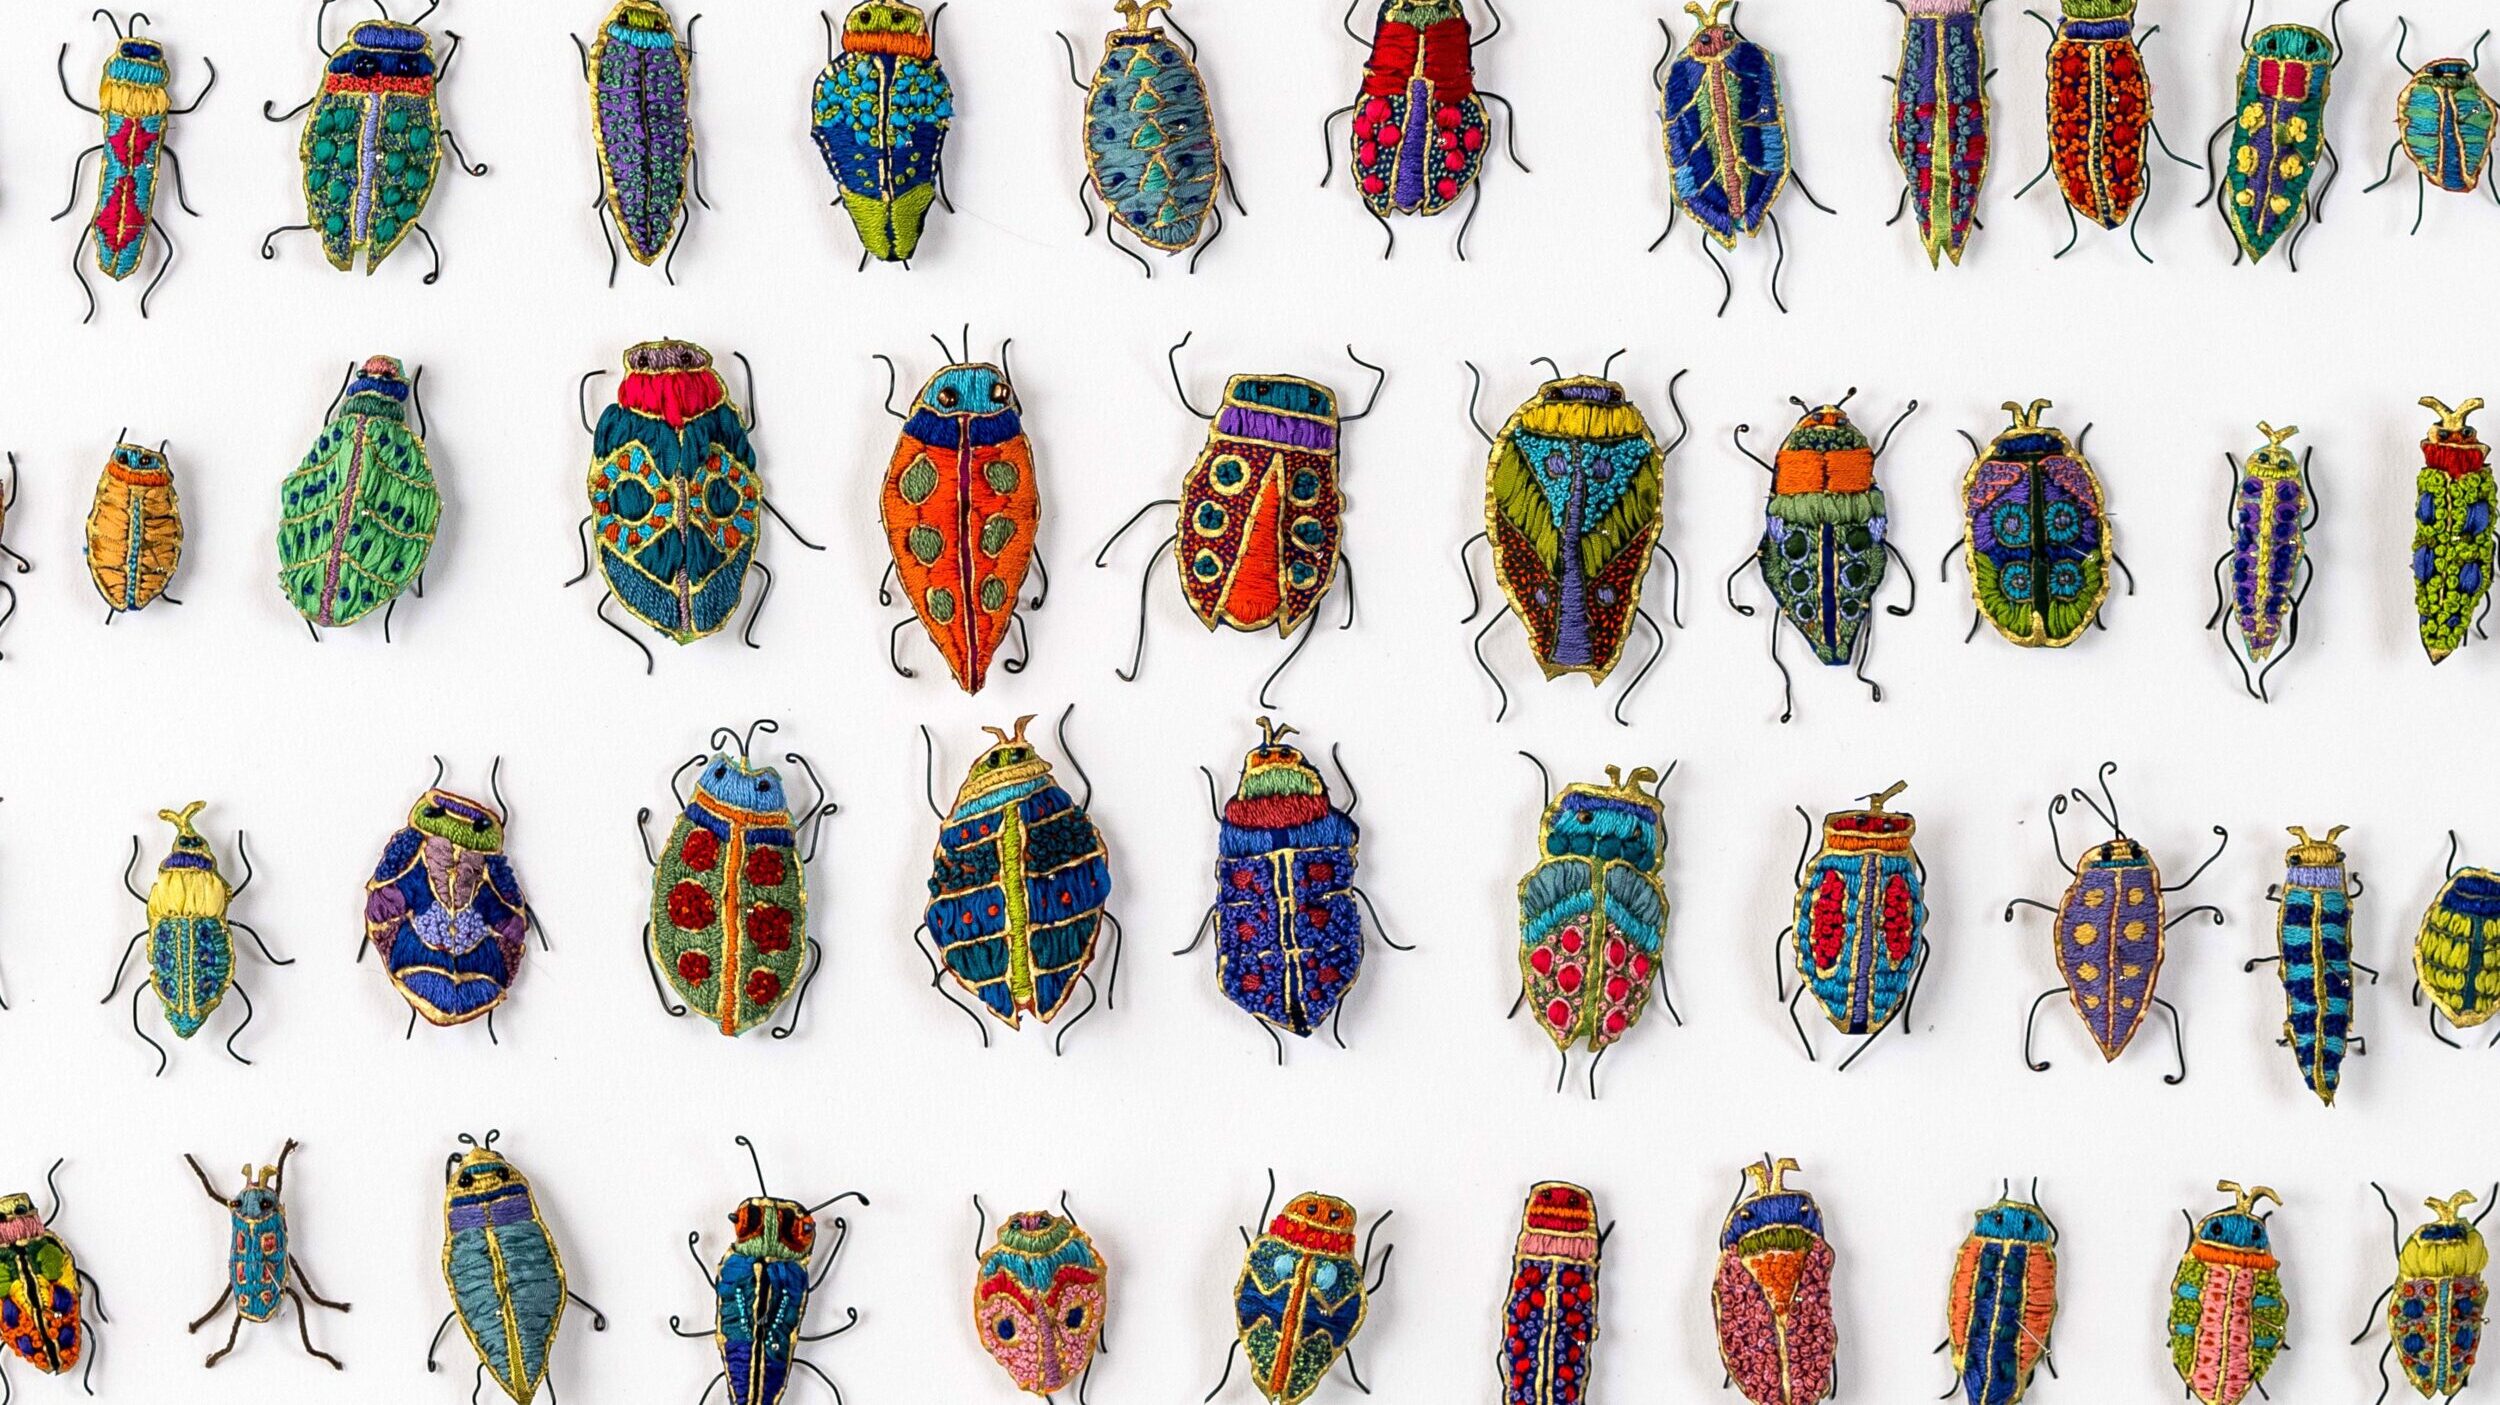 Insects and Stitches and Beyond Out of Hand Exhibition Events News